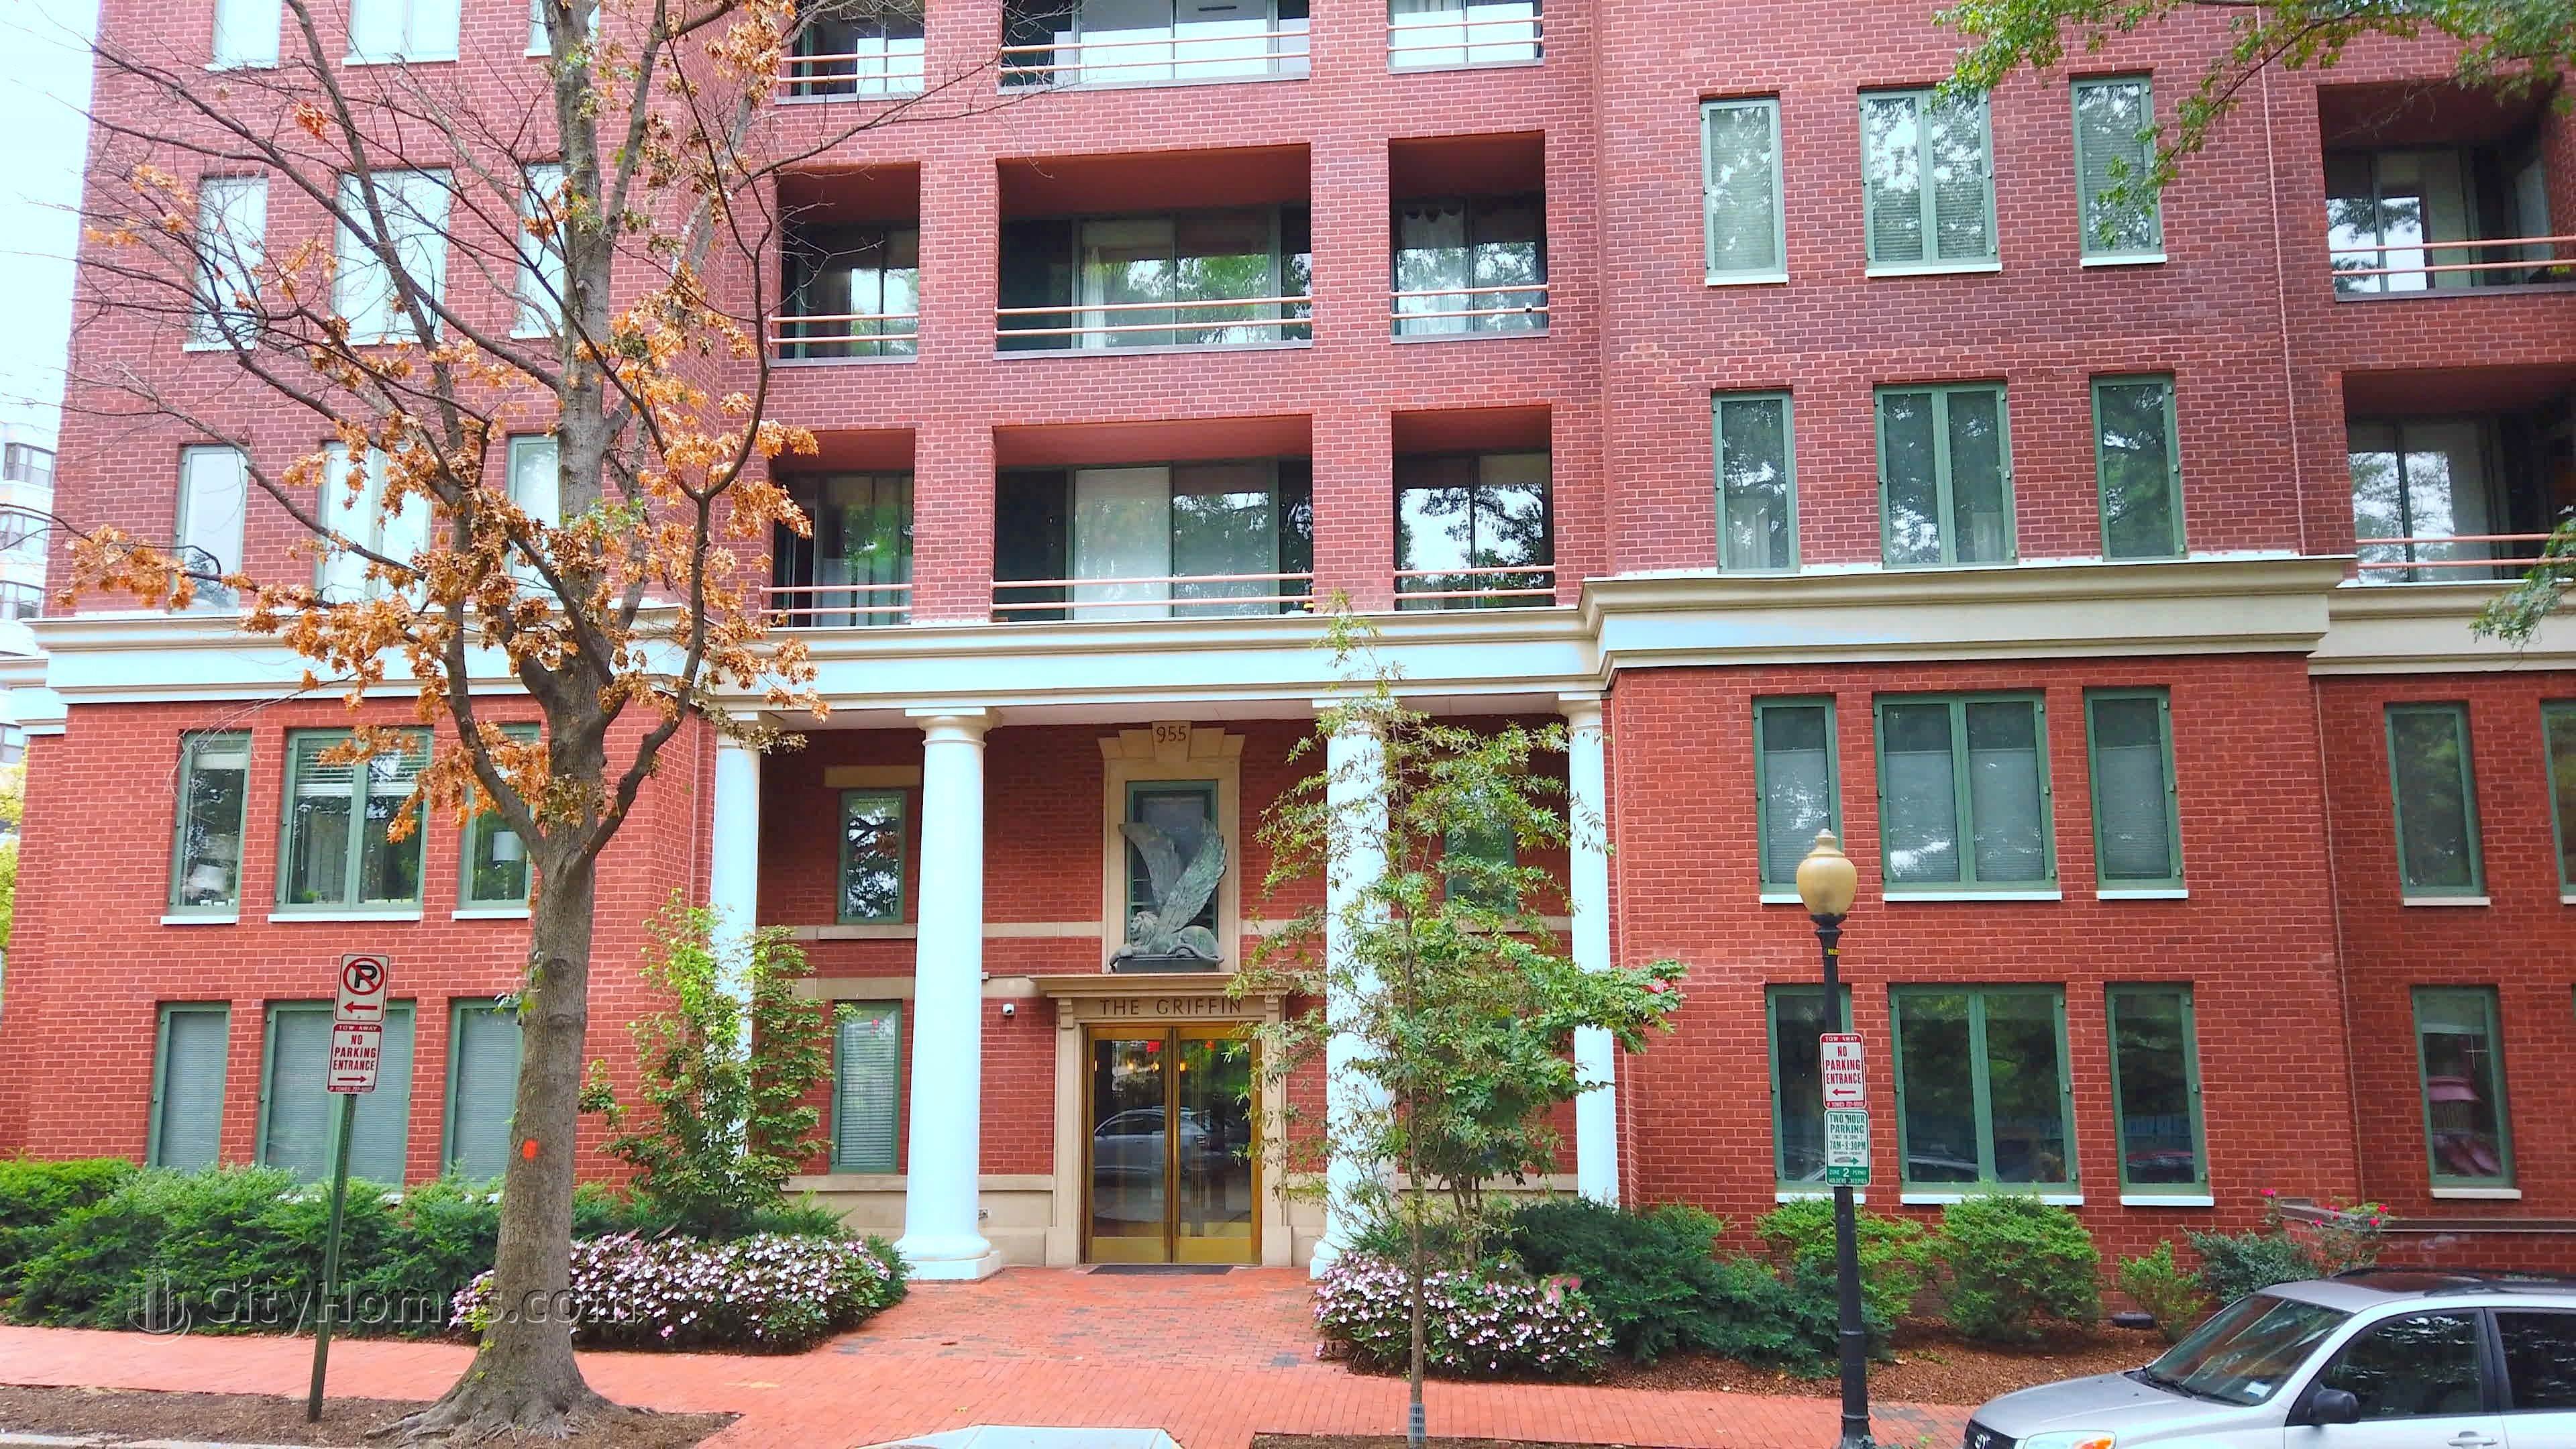 3. The Griffin building at 955 26th St NW, Foggy Bottom, Washington, DC 20037